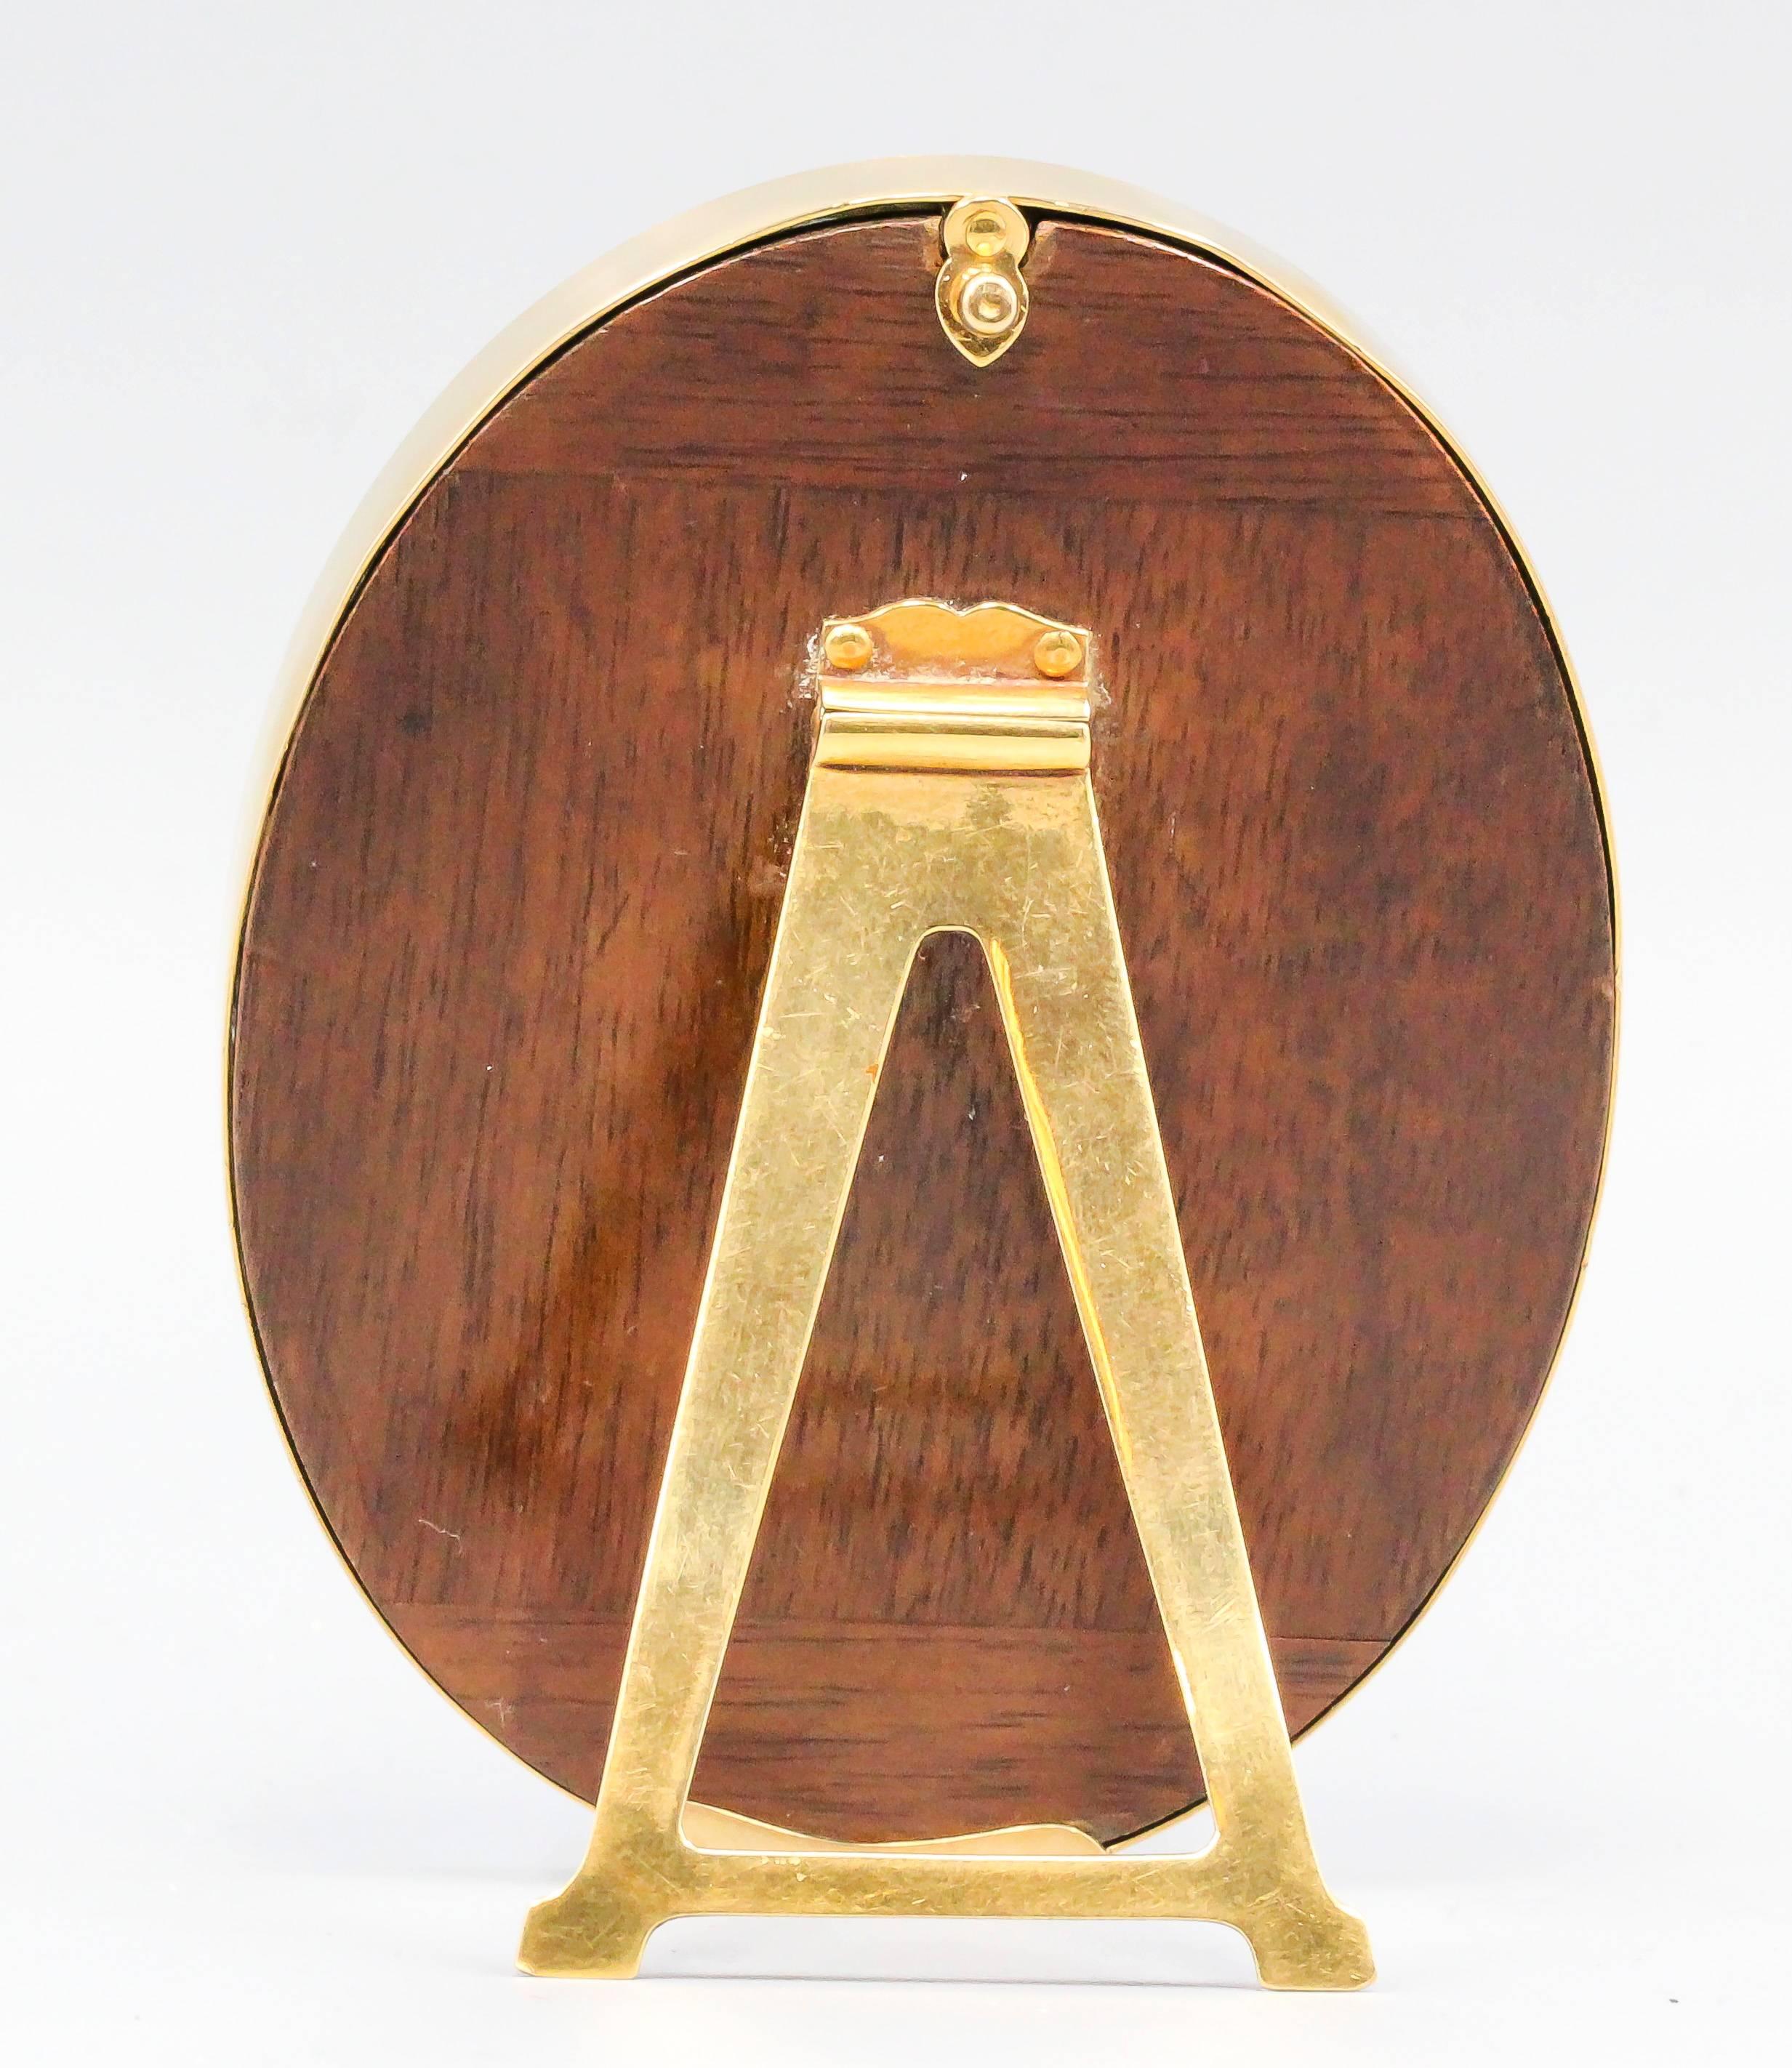 Elegant 18K yellow gold oval picture frame by Tiffany & Co., circa 1920s. It features an oval design and can hold a 3